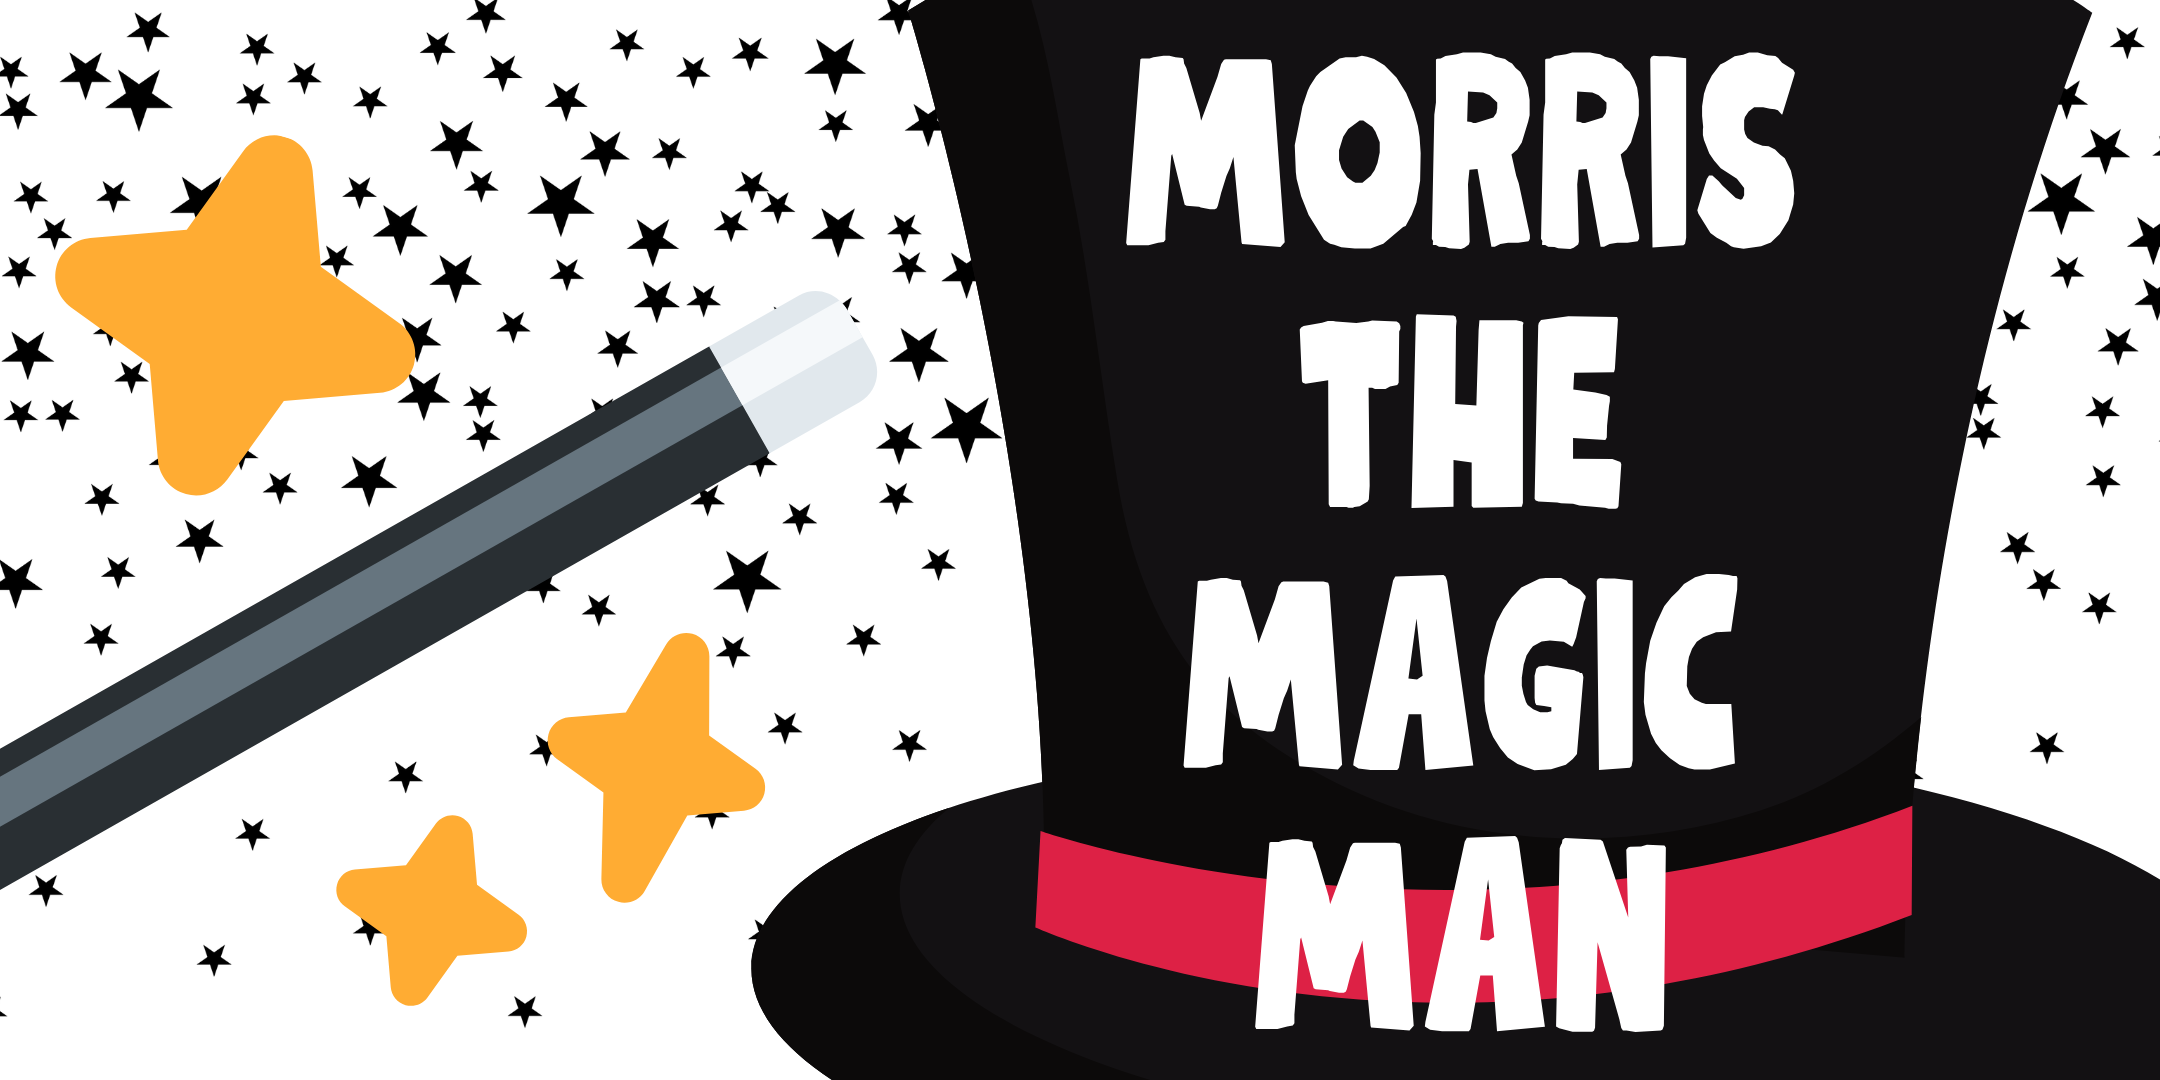 image with text stating Morris the Magic Man on a black top hat with a red band around the brim edge, with a wand and stars in the background in black and yellow colors.